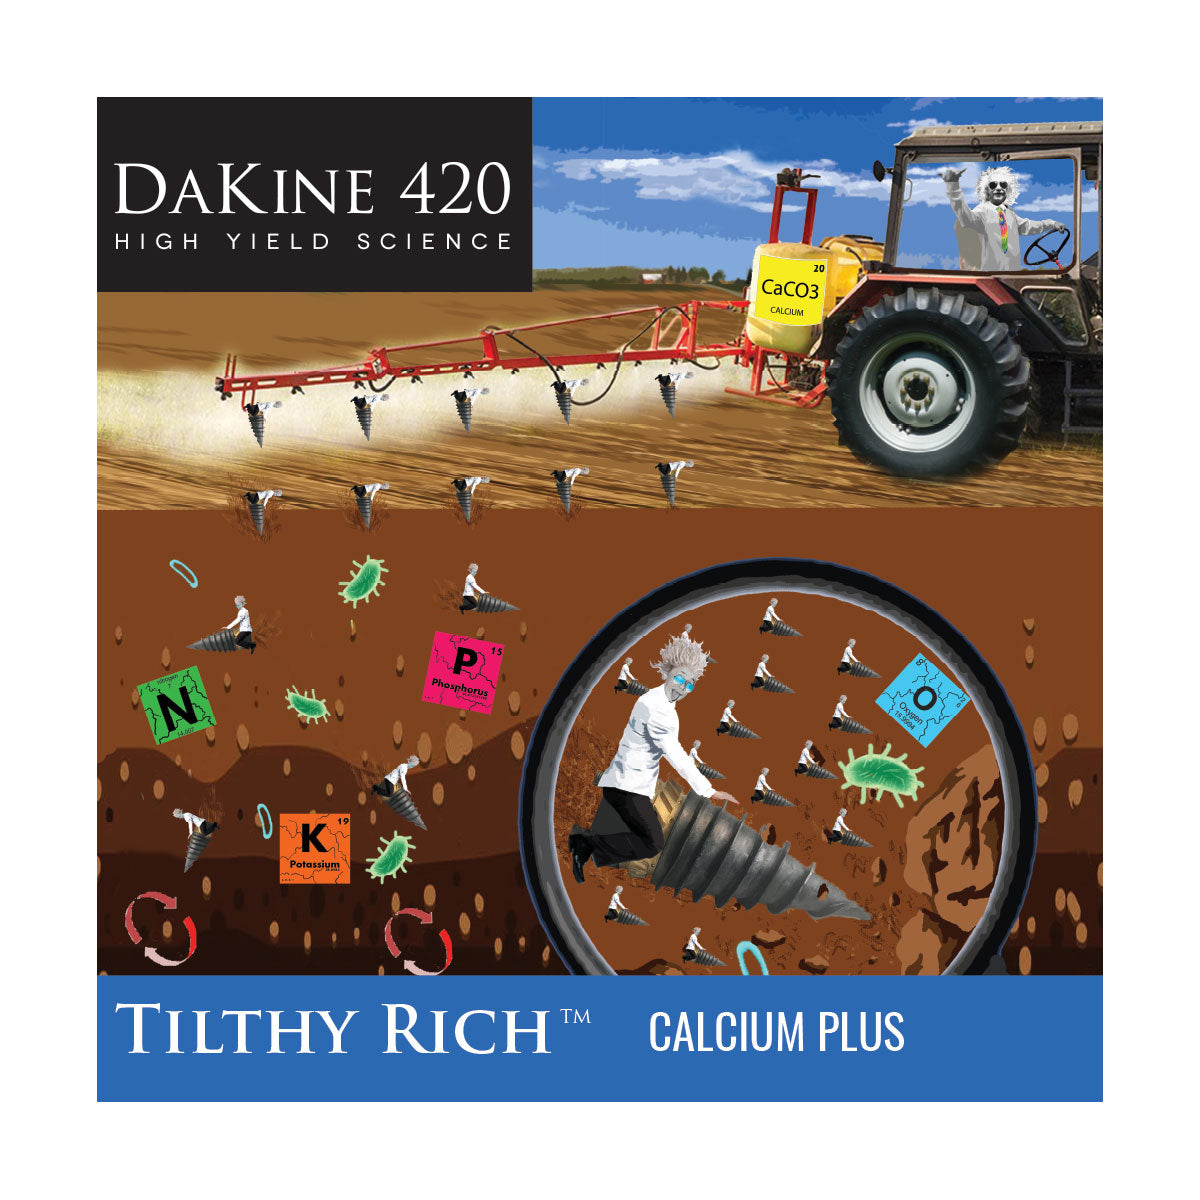 Dakine 420 Tilthy Rich™ Calcium Plus Hemp & Cannabis Fertilizer. Tilthy Rich™ Calcium-Plus hemp fertilizer combines a specially formulated blend of calcium plus zinc and manganese to benefit the soil ecosystem.